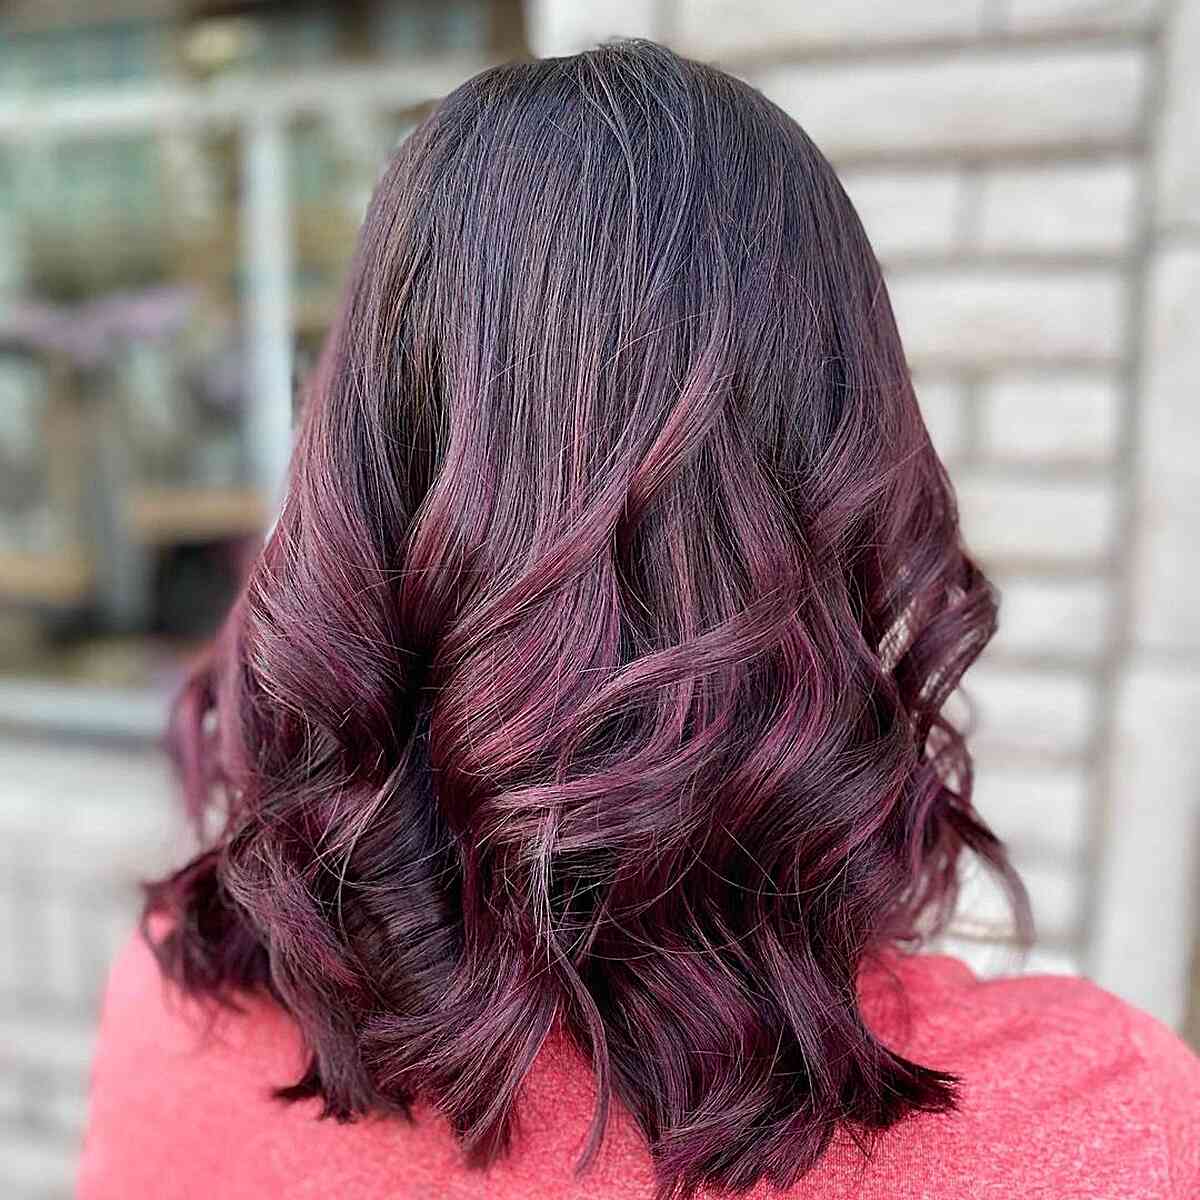 Burgundy Balayage Highlights on Shoulder-Length Cut with Thick Waves